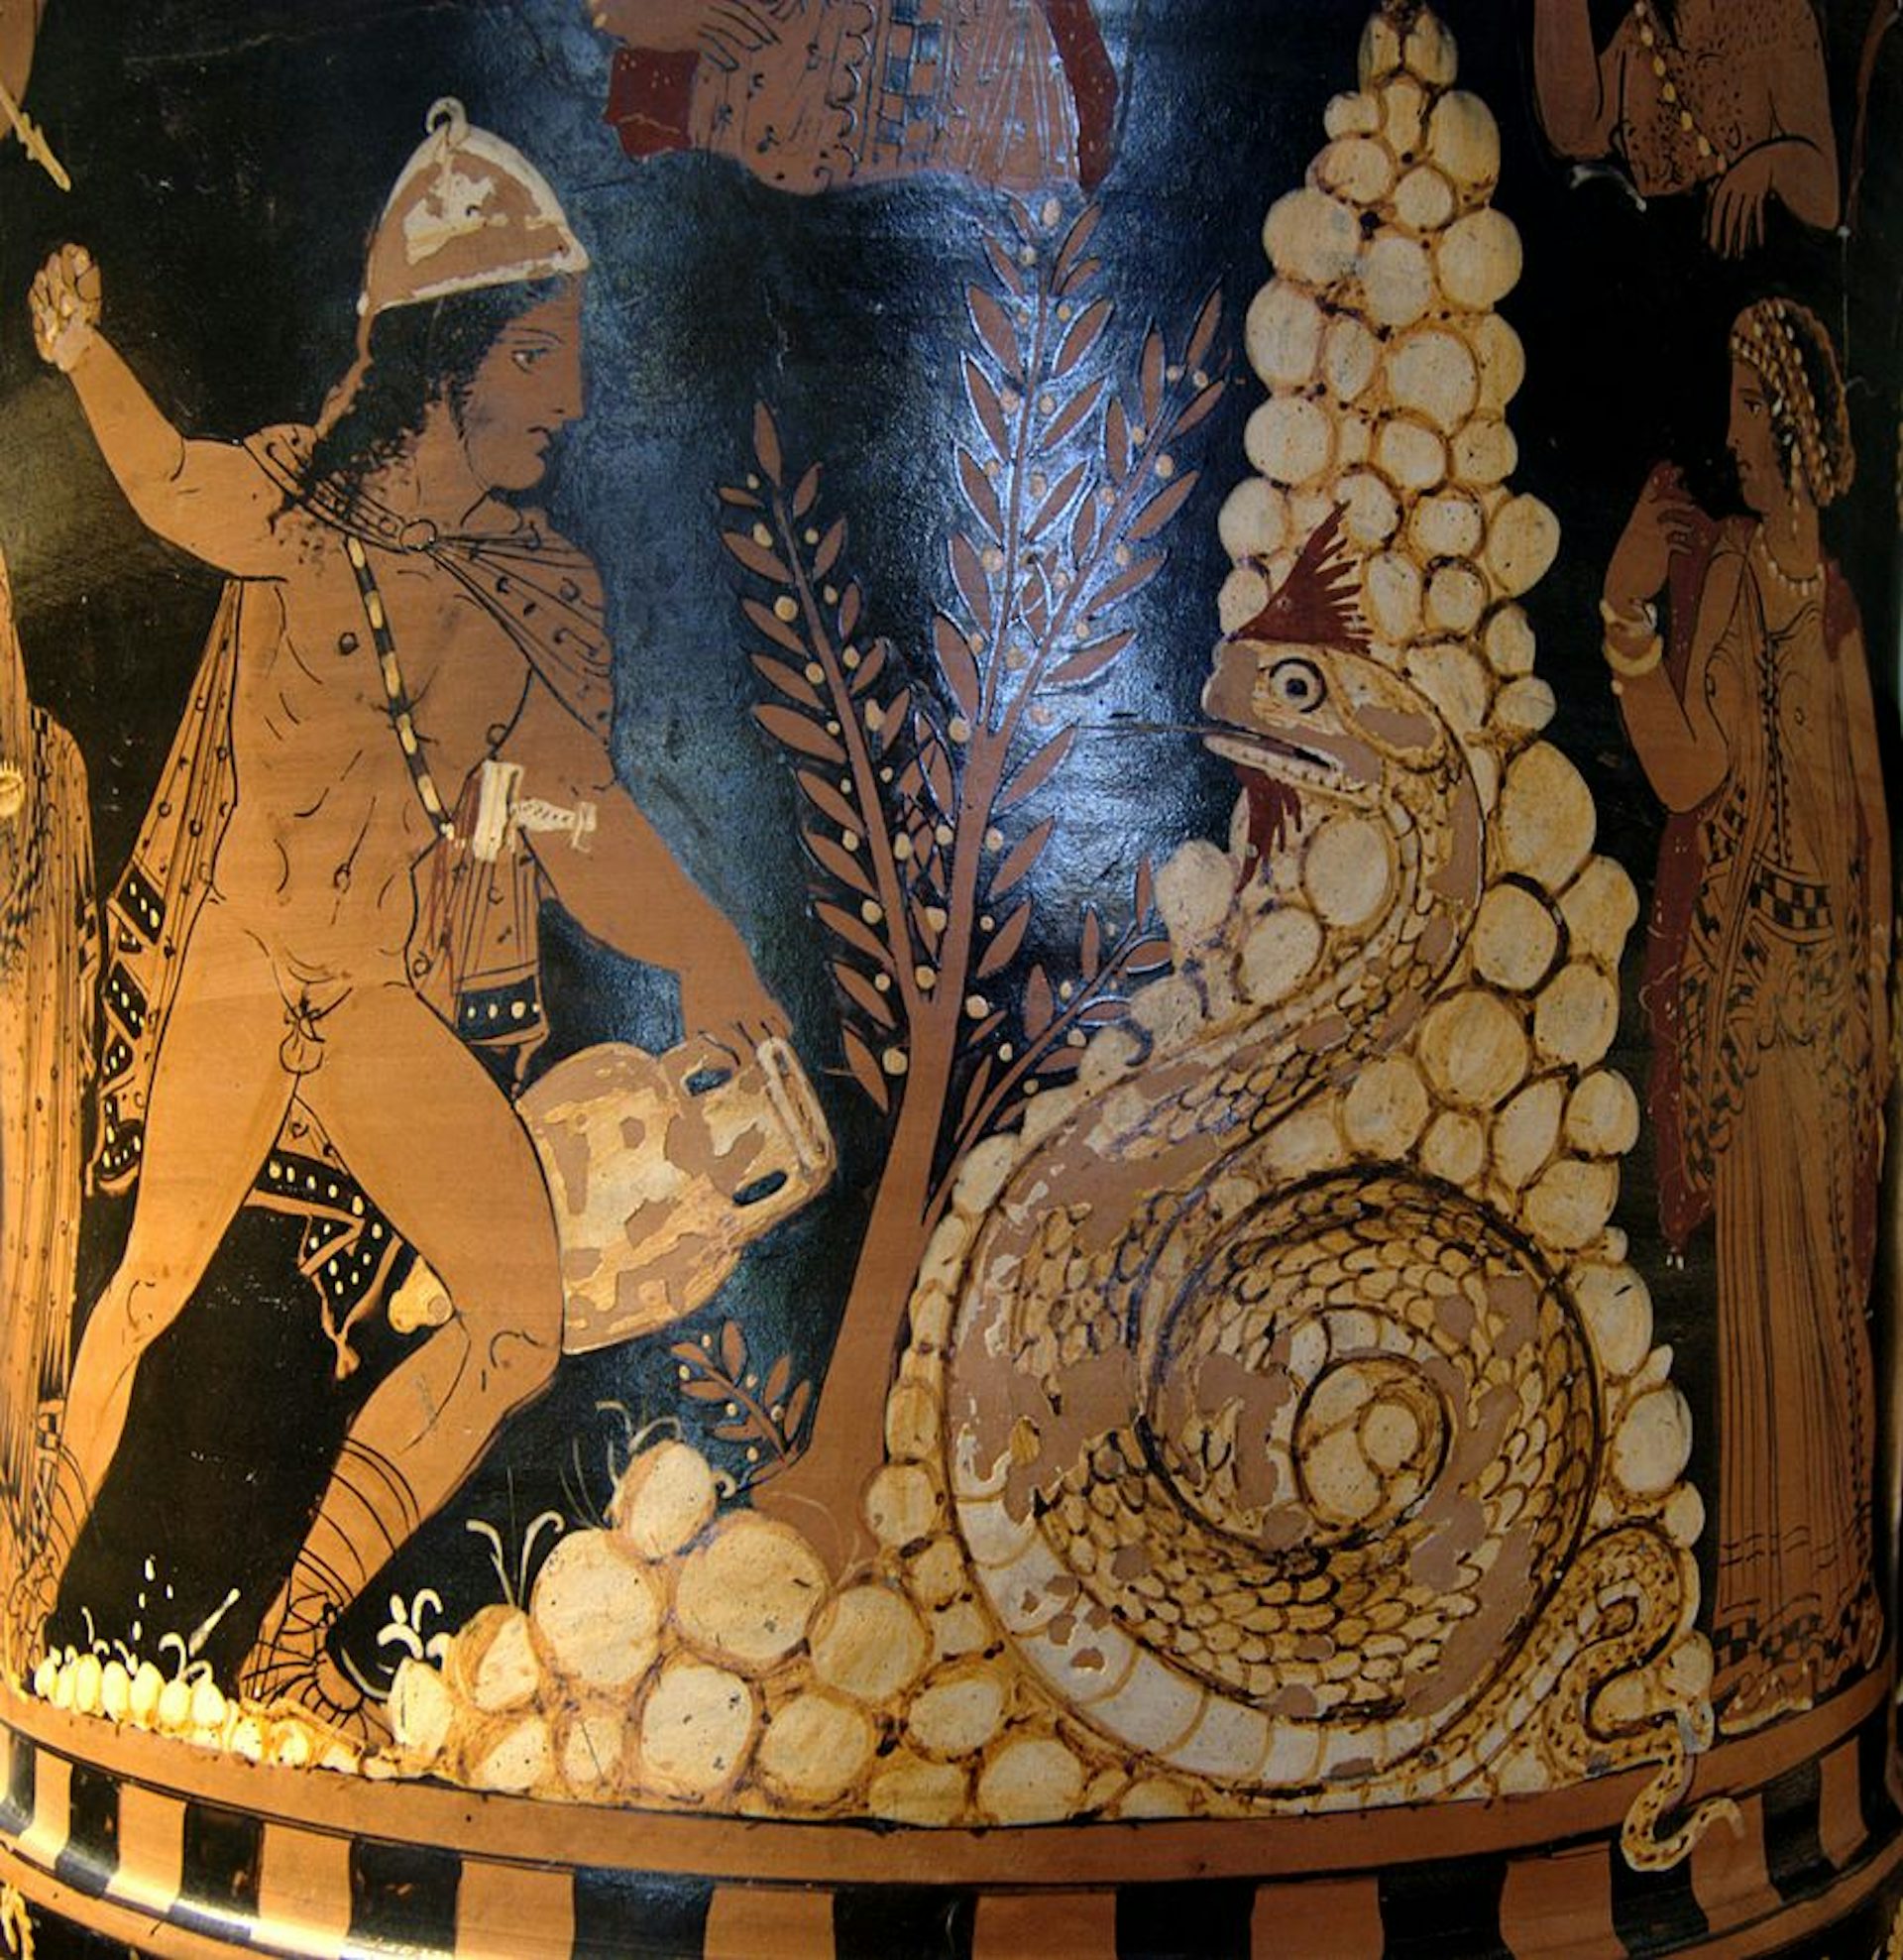 Vase painting of Cadmus fighting the dragon